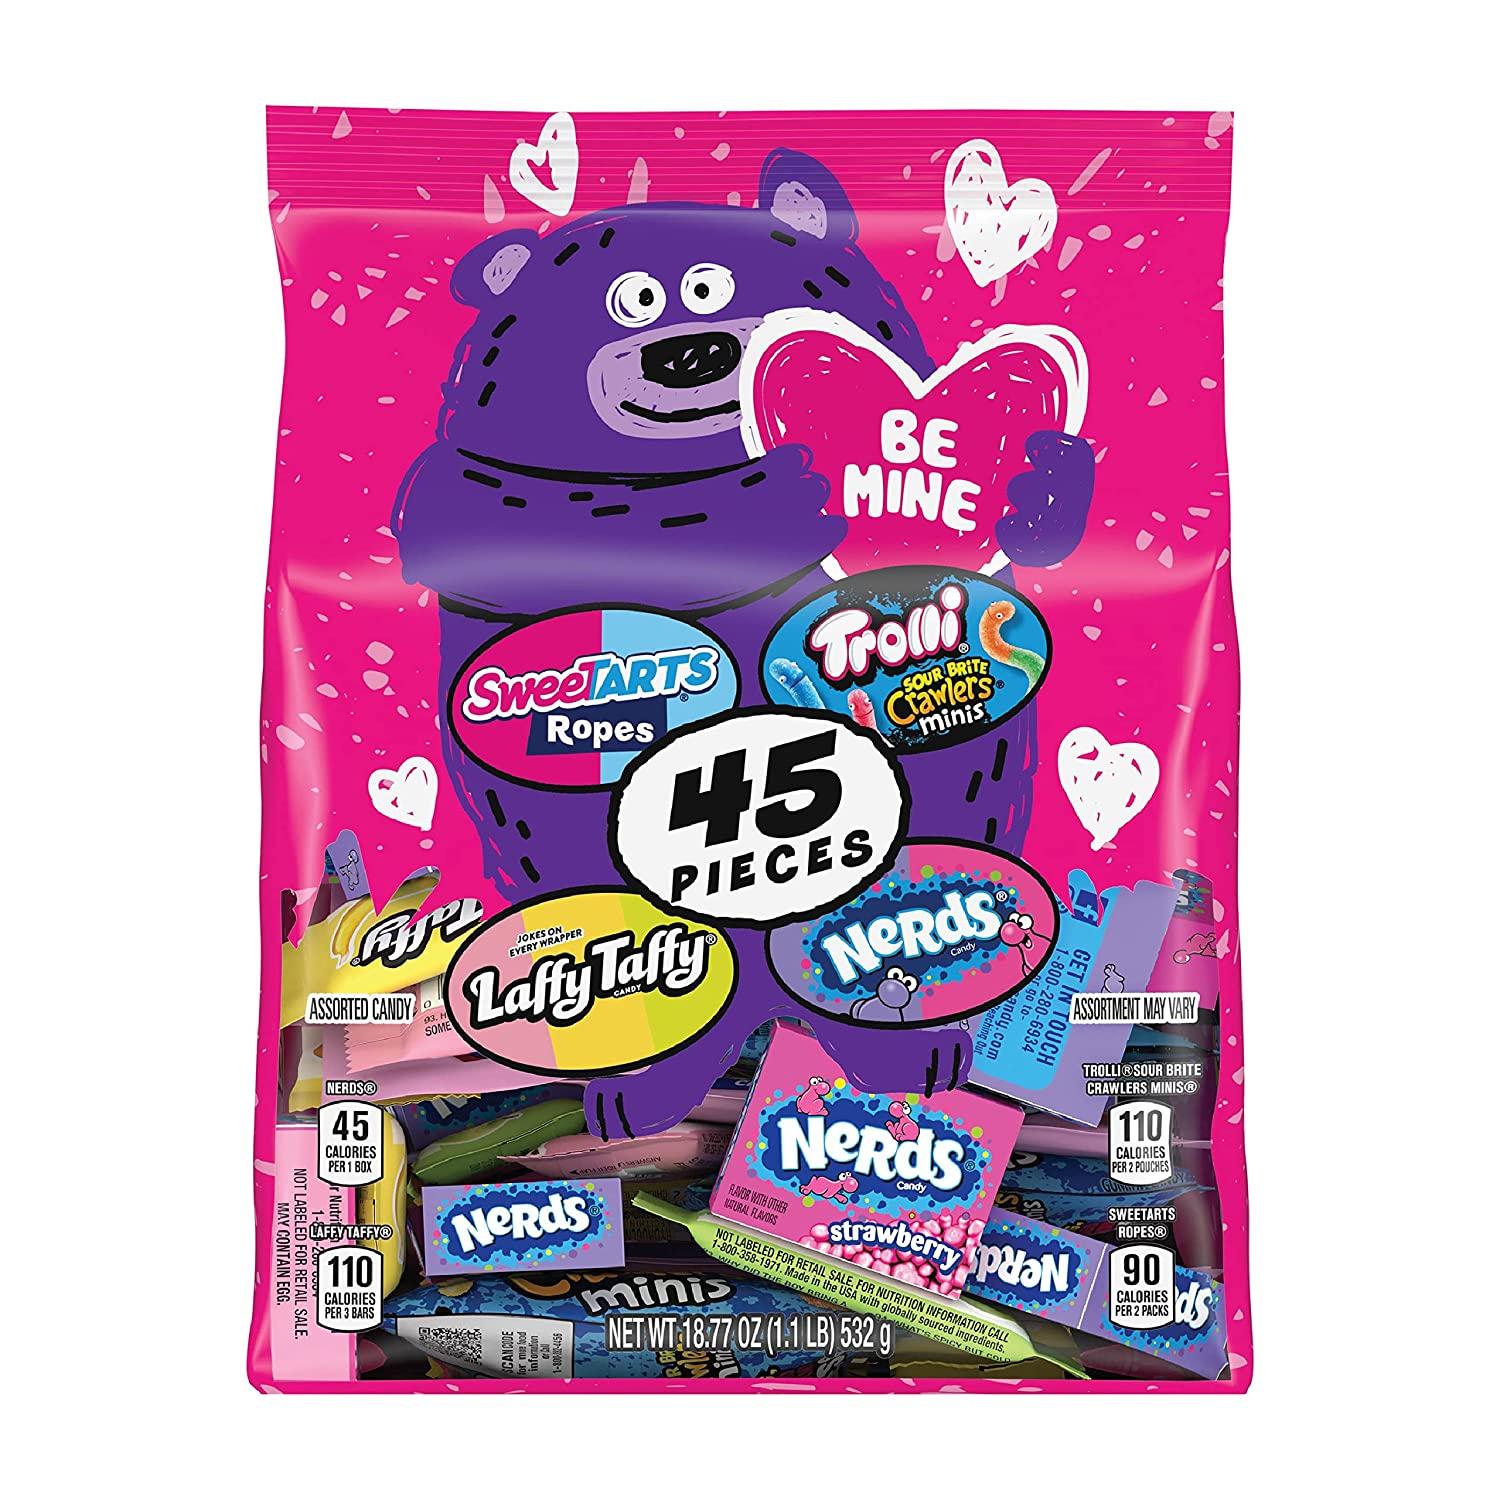 Brachs Valentines Day Be Mine Candy Mix Bag for $6.98